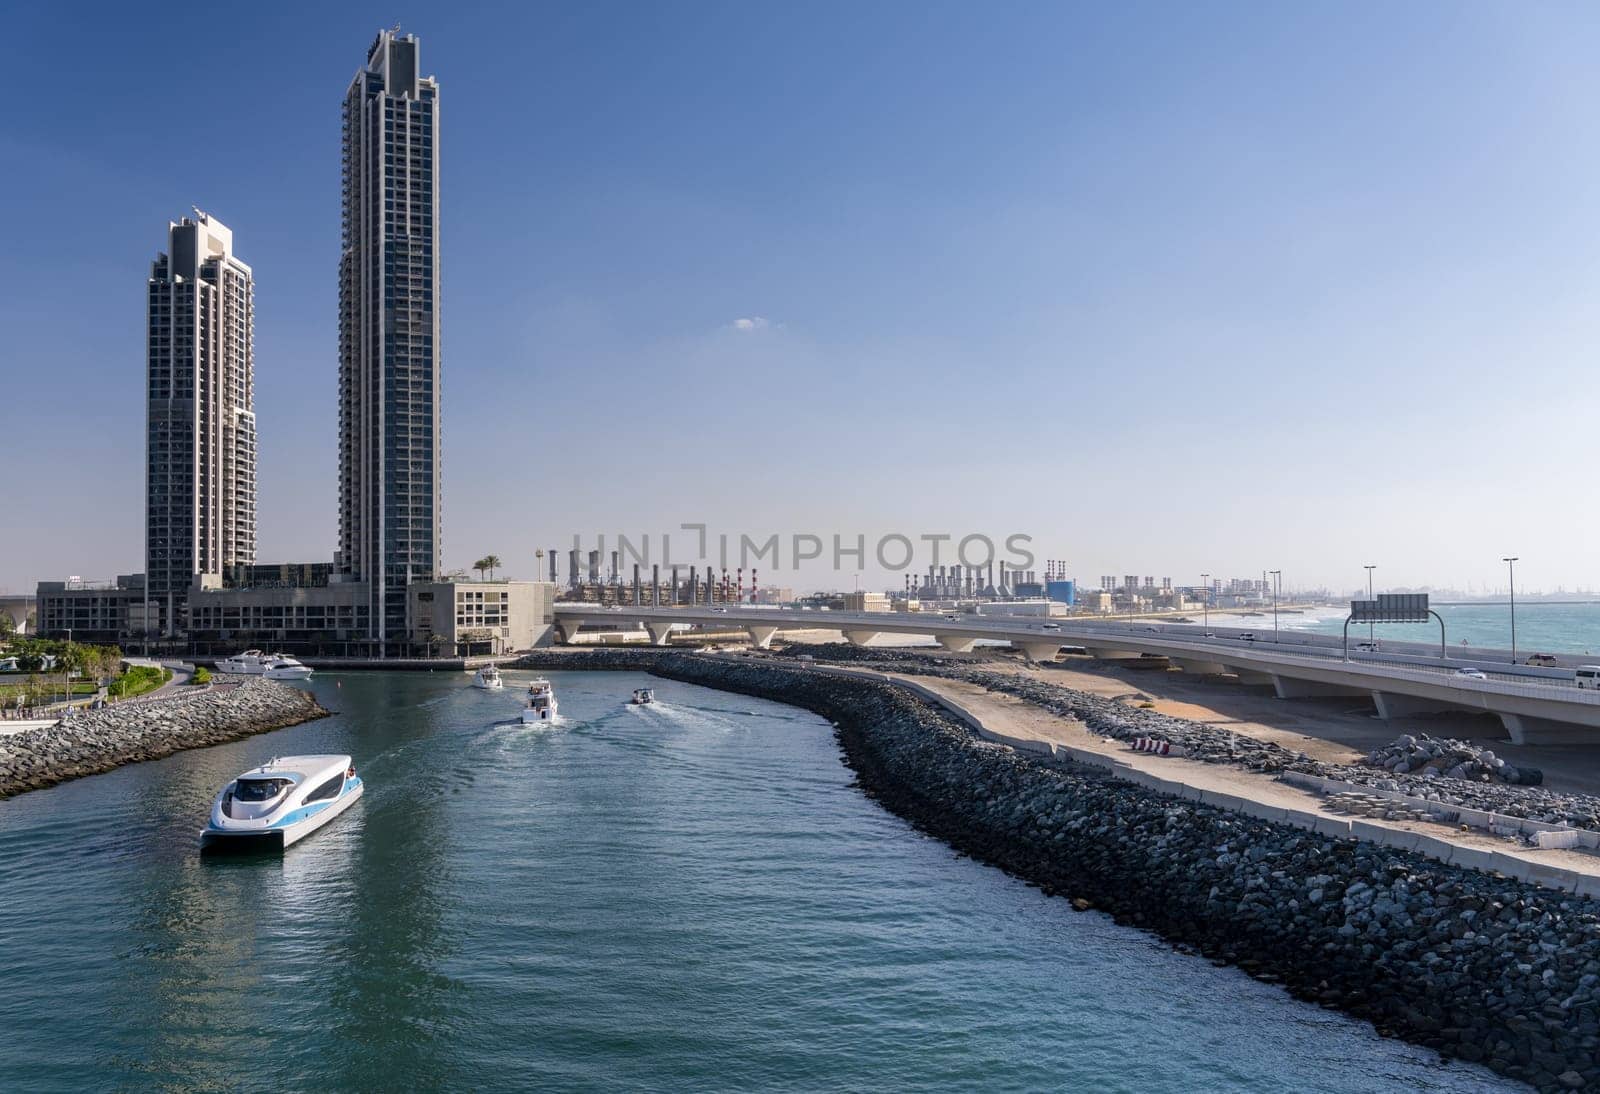 Power station and industrial area of Dubai by JBR Beach by steheap